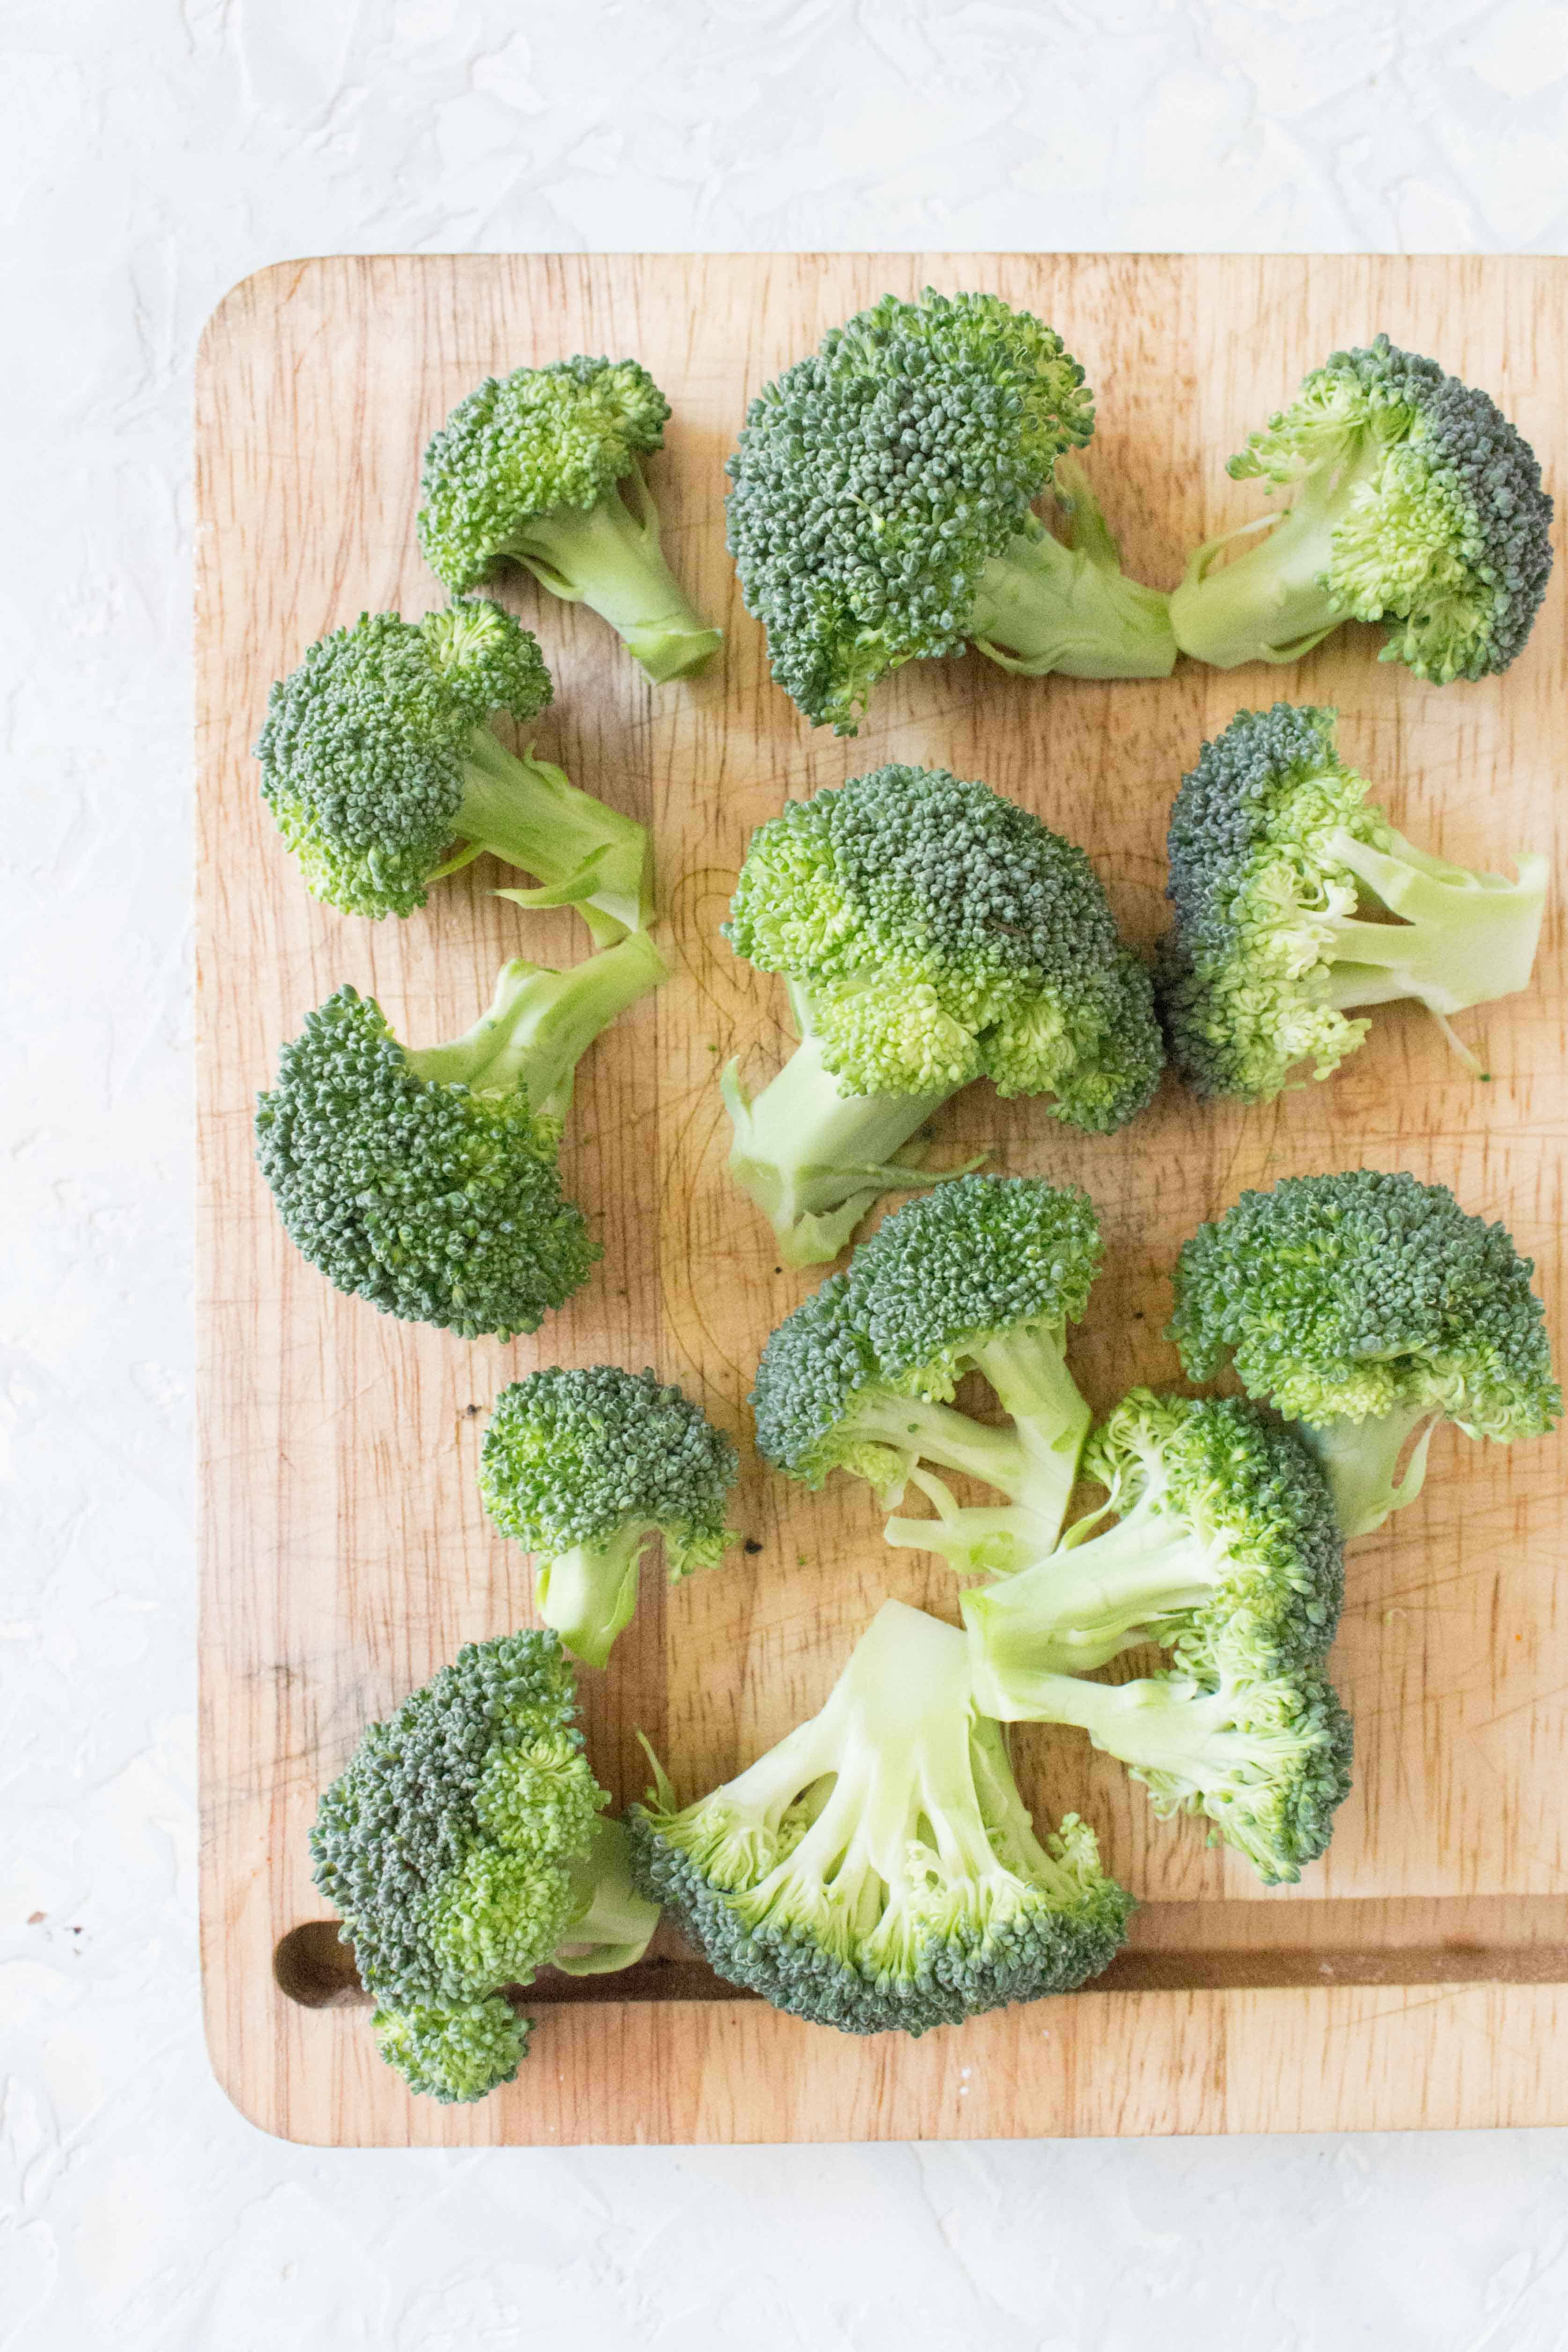 What You'll Need To Make Broccoli in the Air Fryer